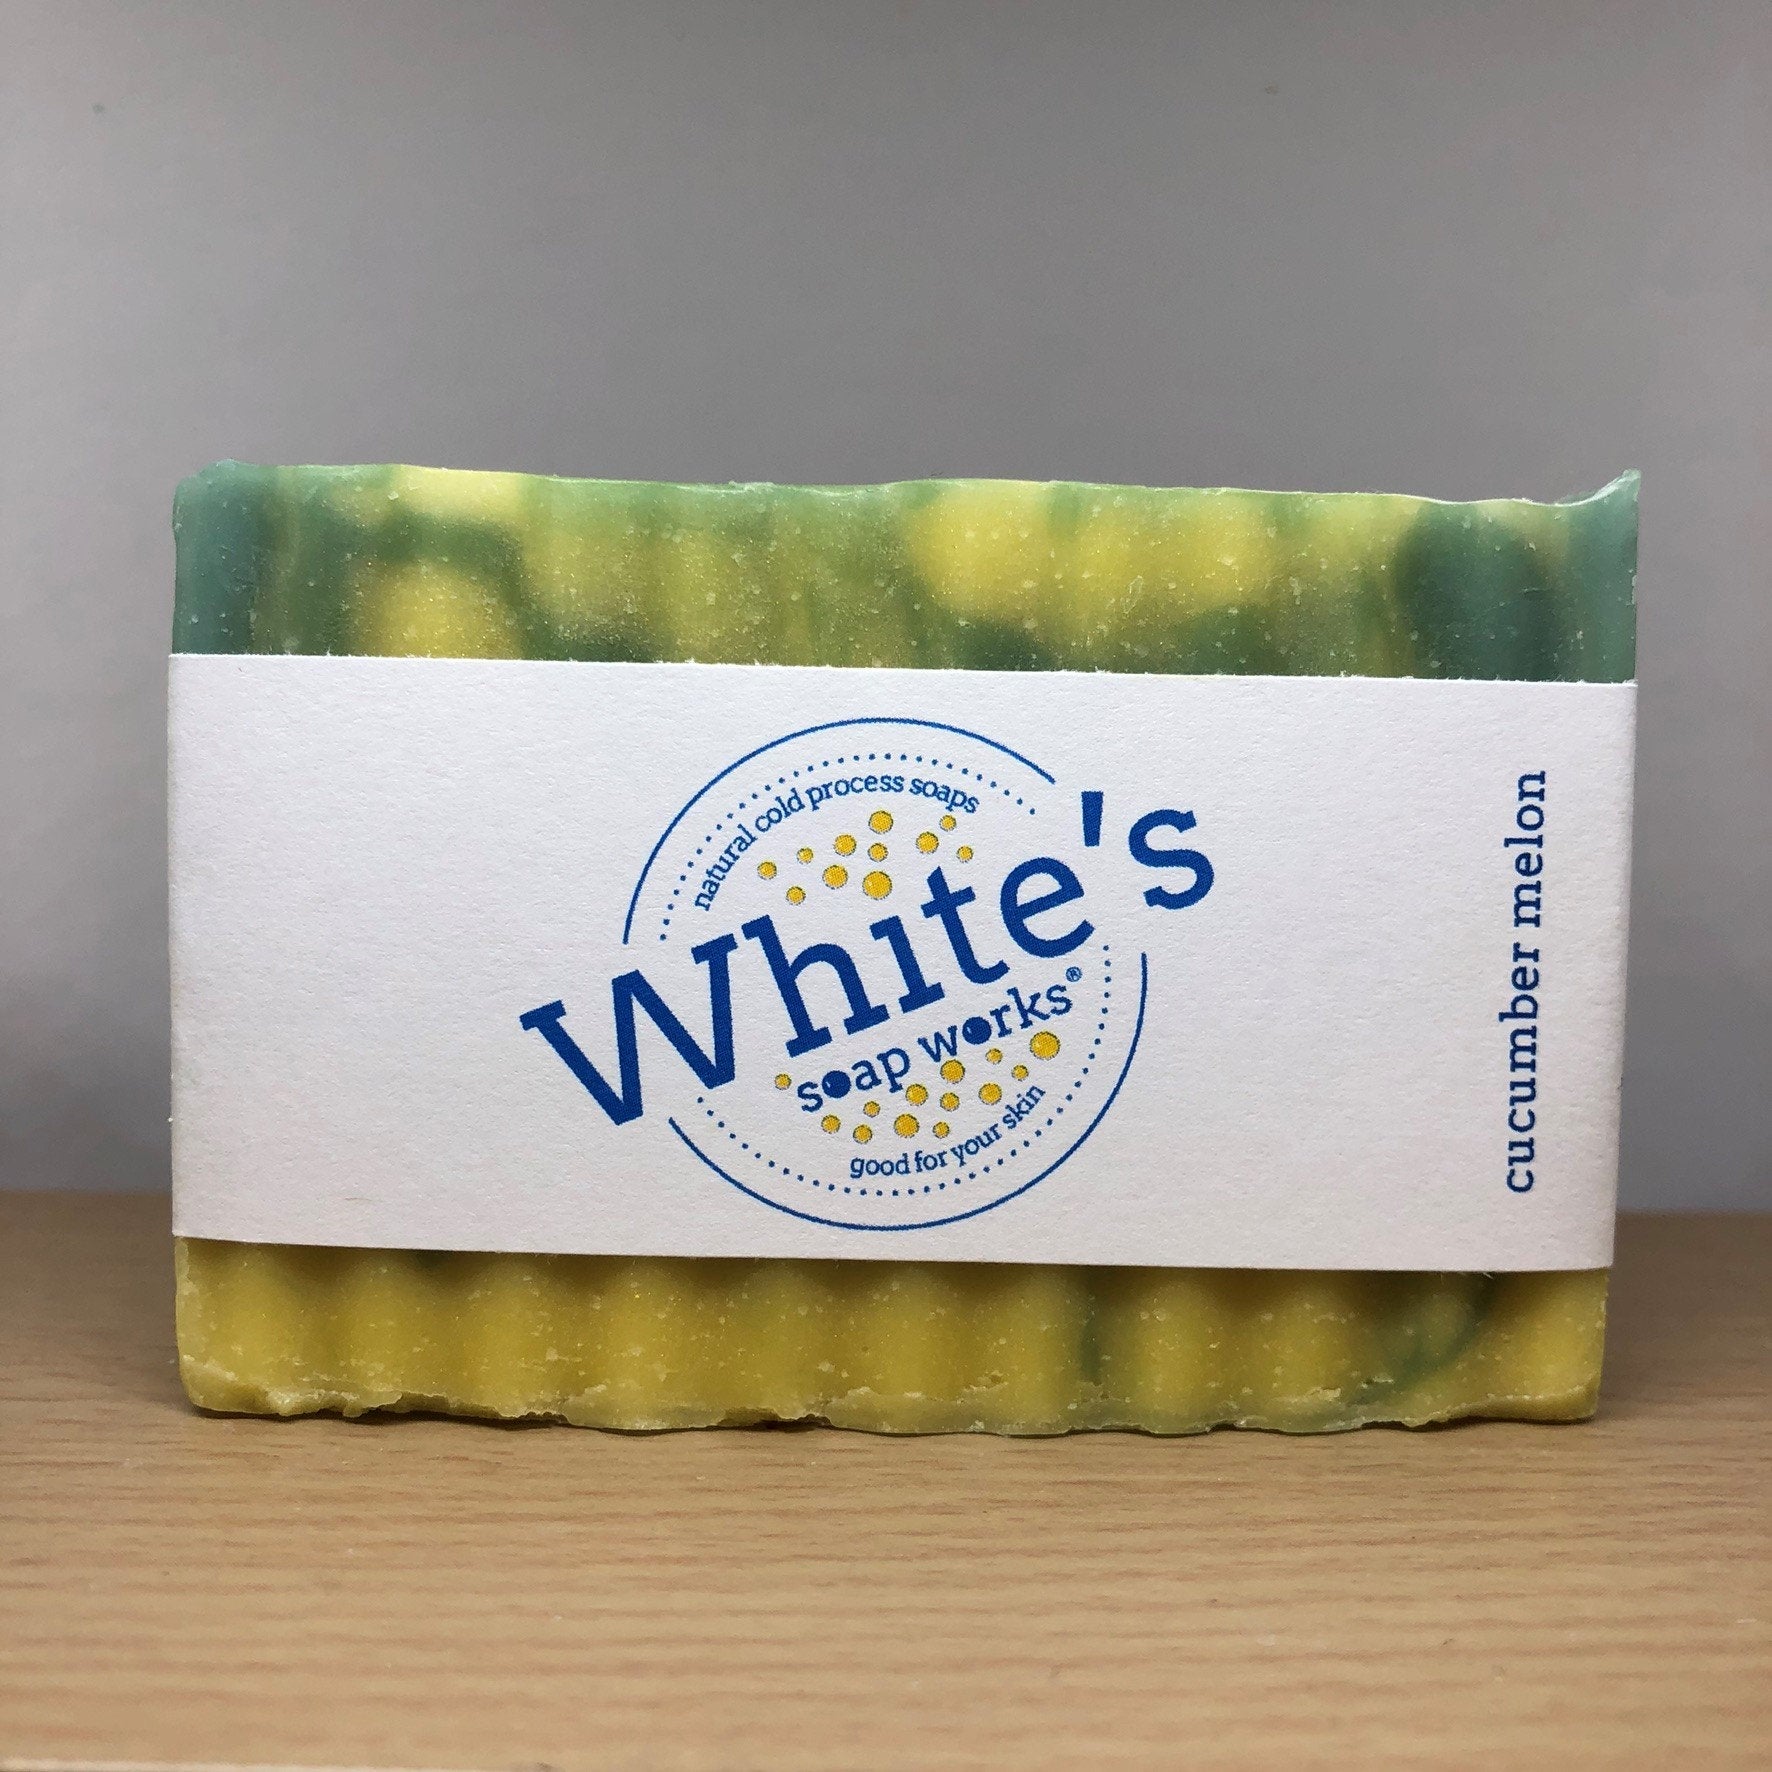 Cucumber Melon Soap - Bright Hope Soapw Works